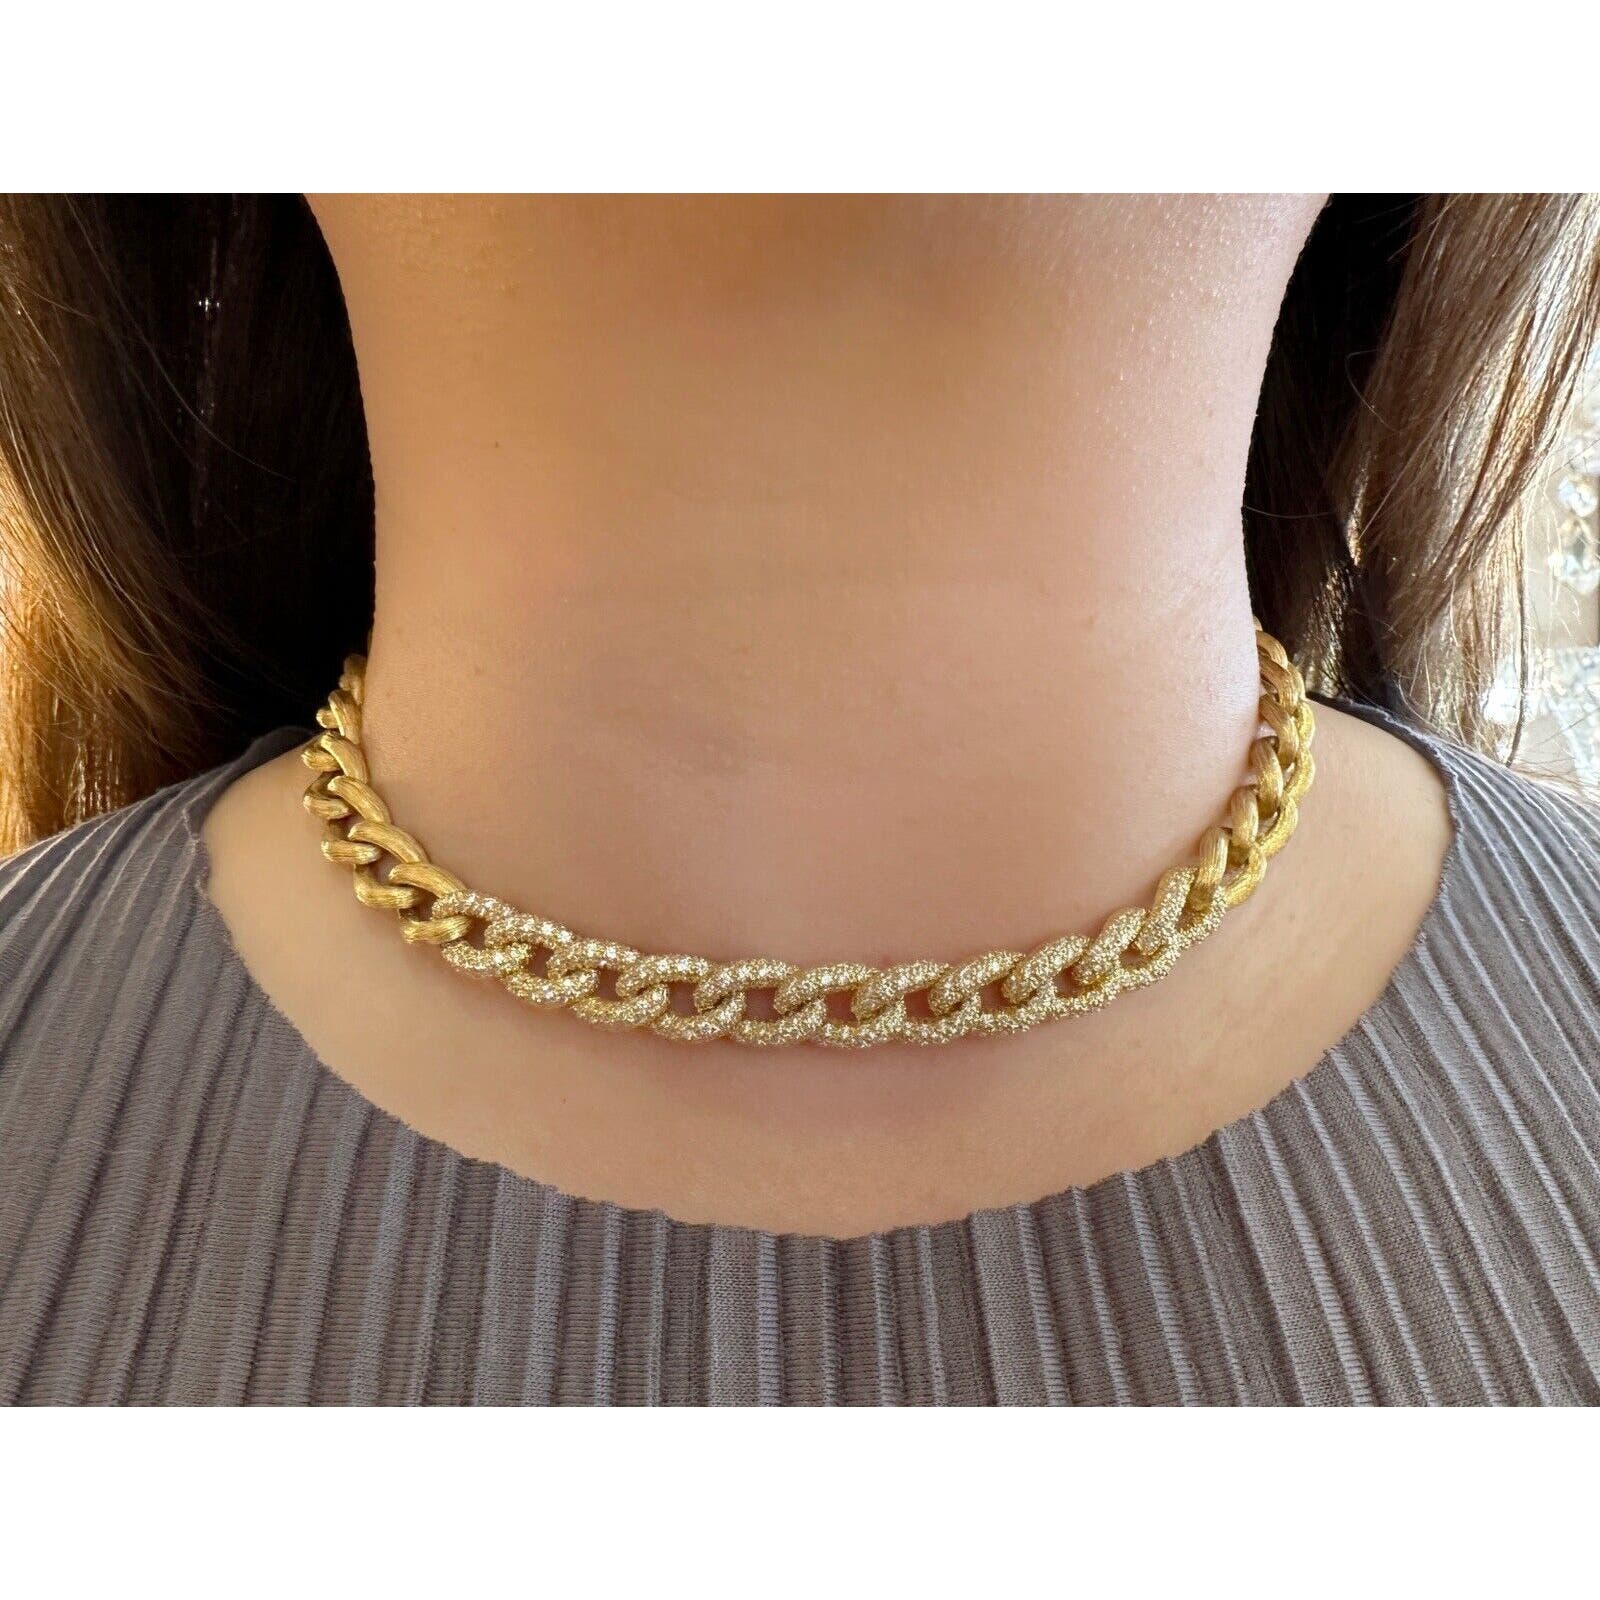 Henry Dunay Curb Diamond Sabi Link Necklace in 18k Yellow Gold - HM2480S